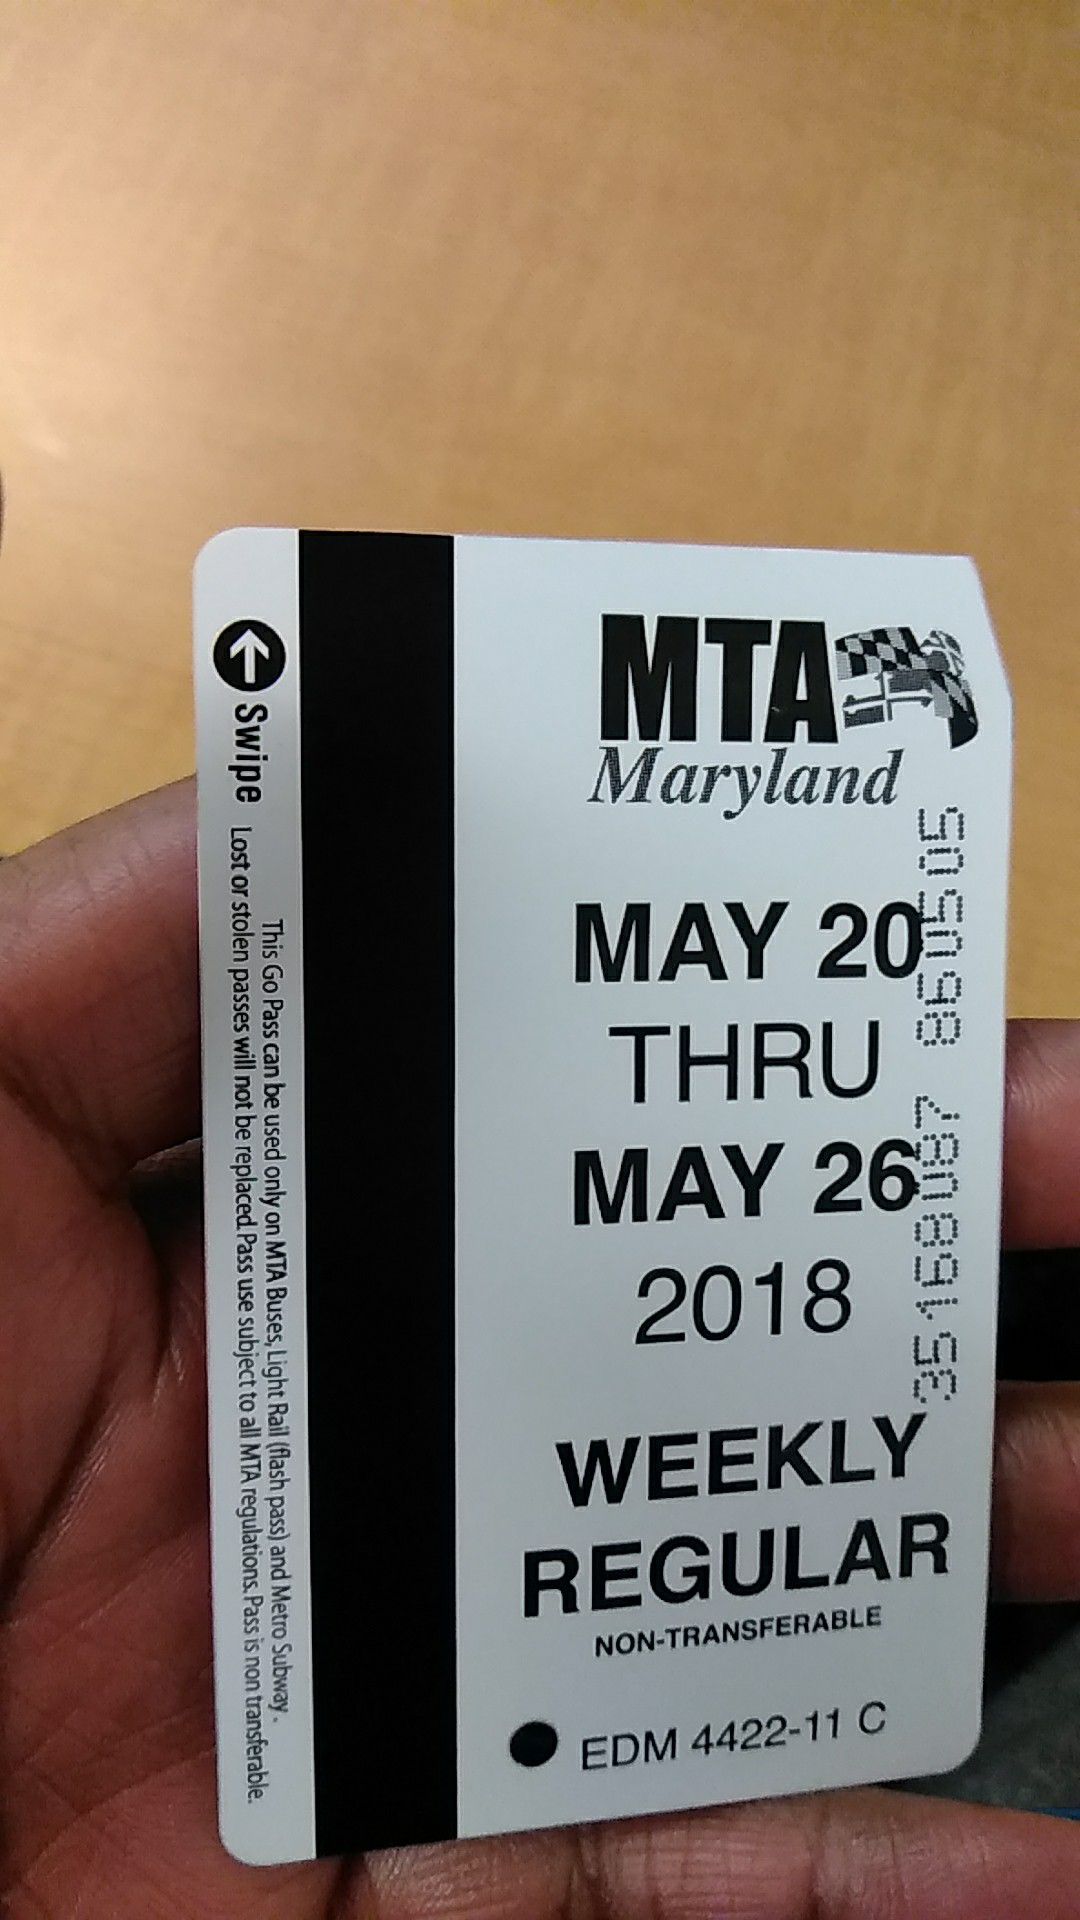 Weekly bus pass